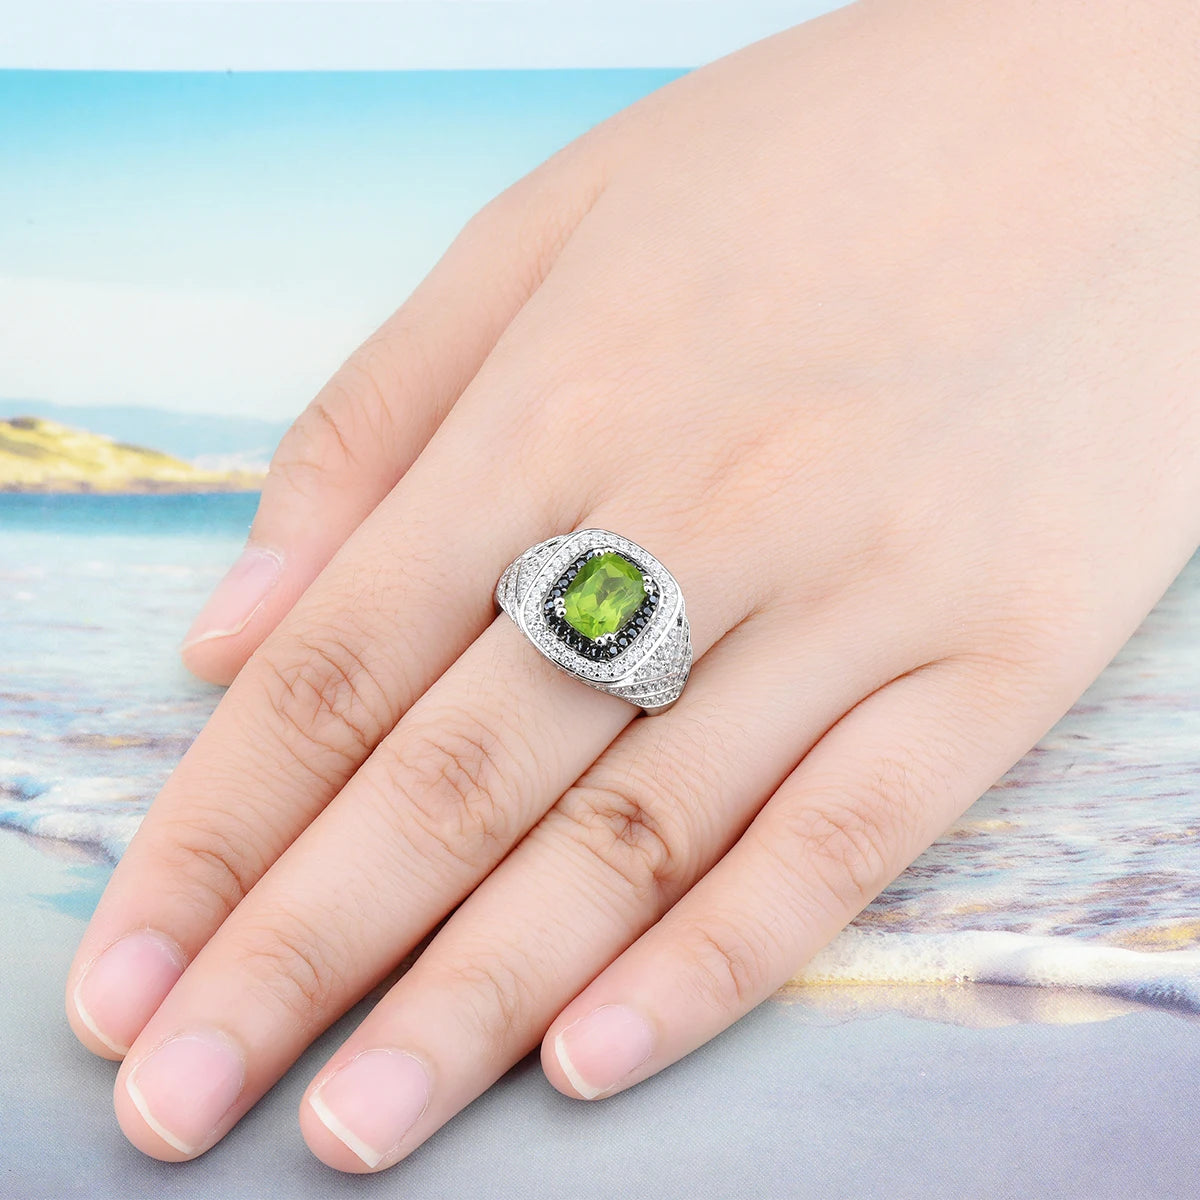 Natural Peridot Black Spinel Solid Sterling Silver Rings Unisex Style 3.2 Carats Genuine Gemstone Original Design Anniversary